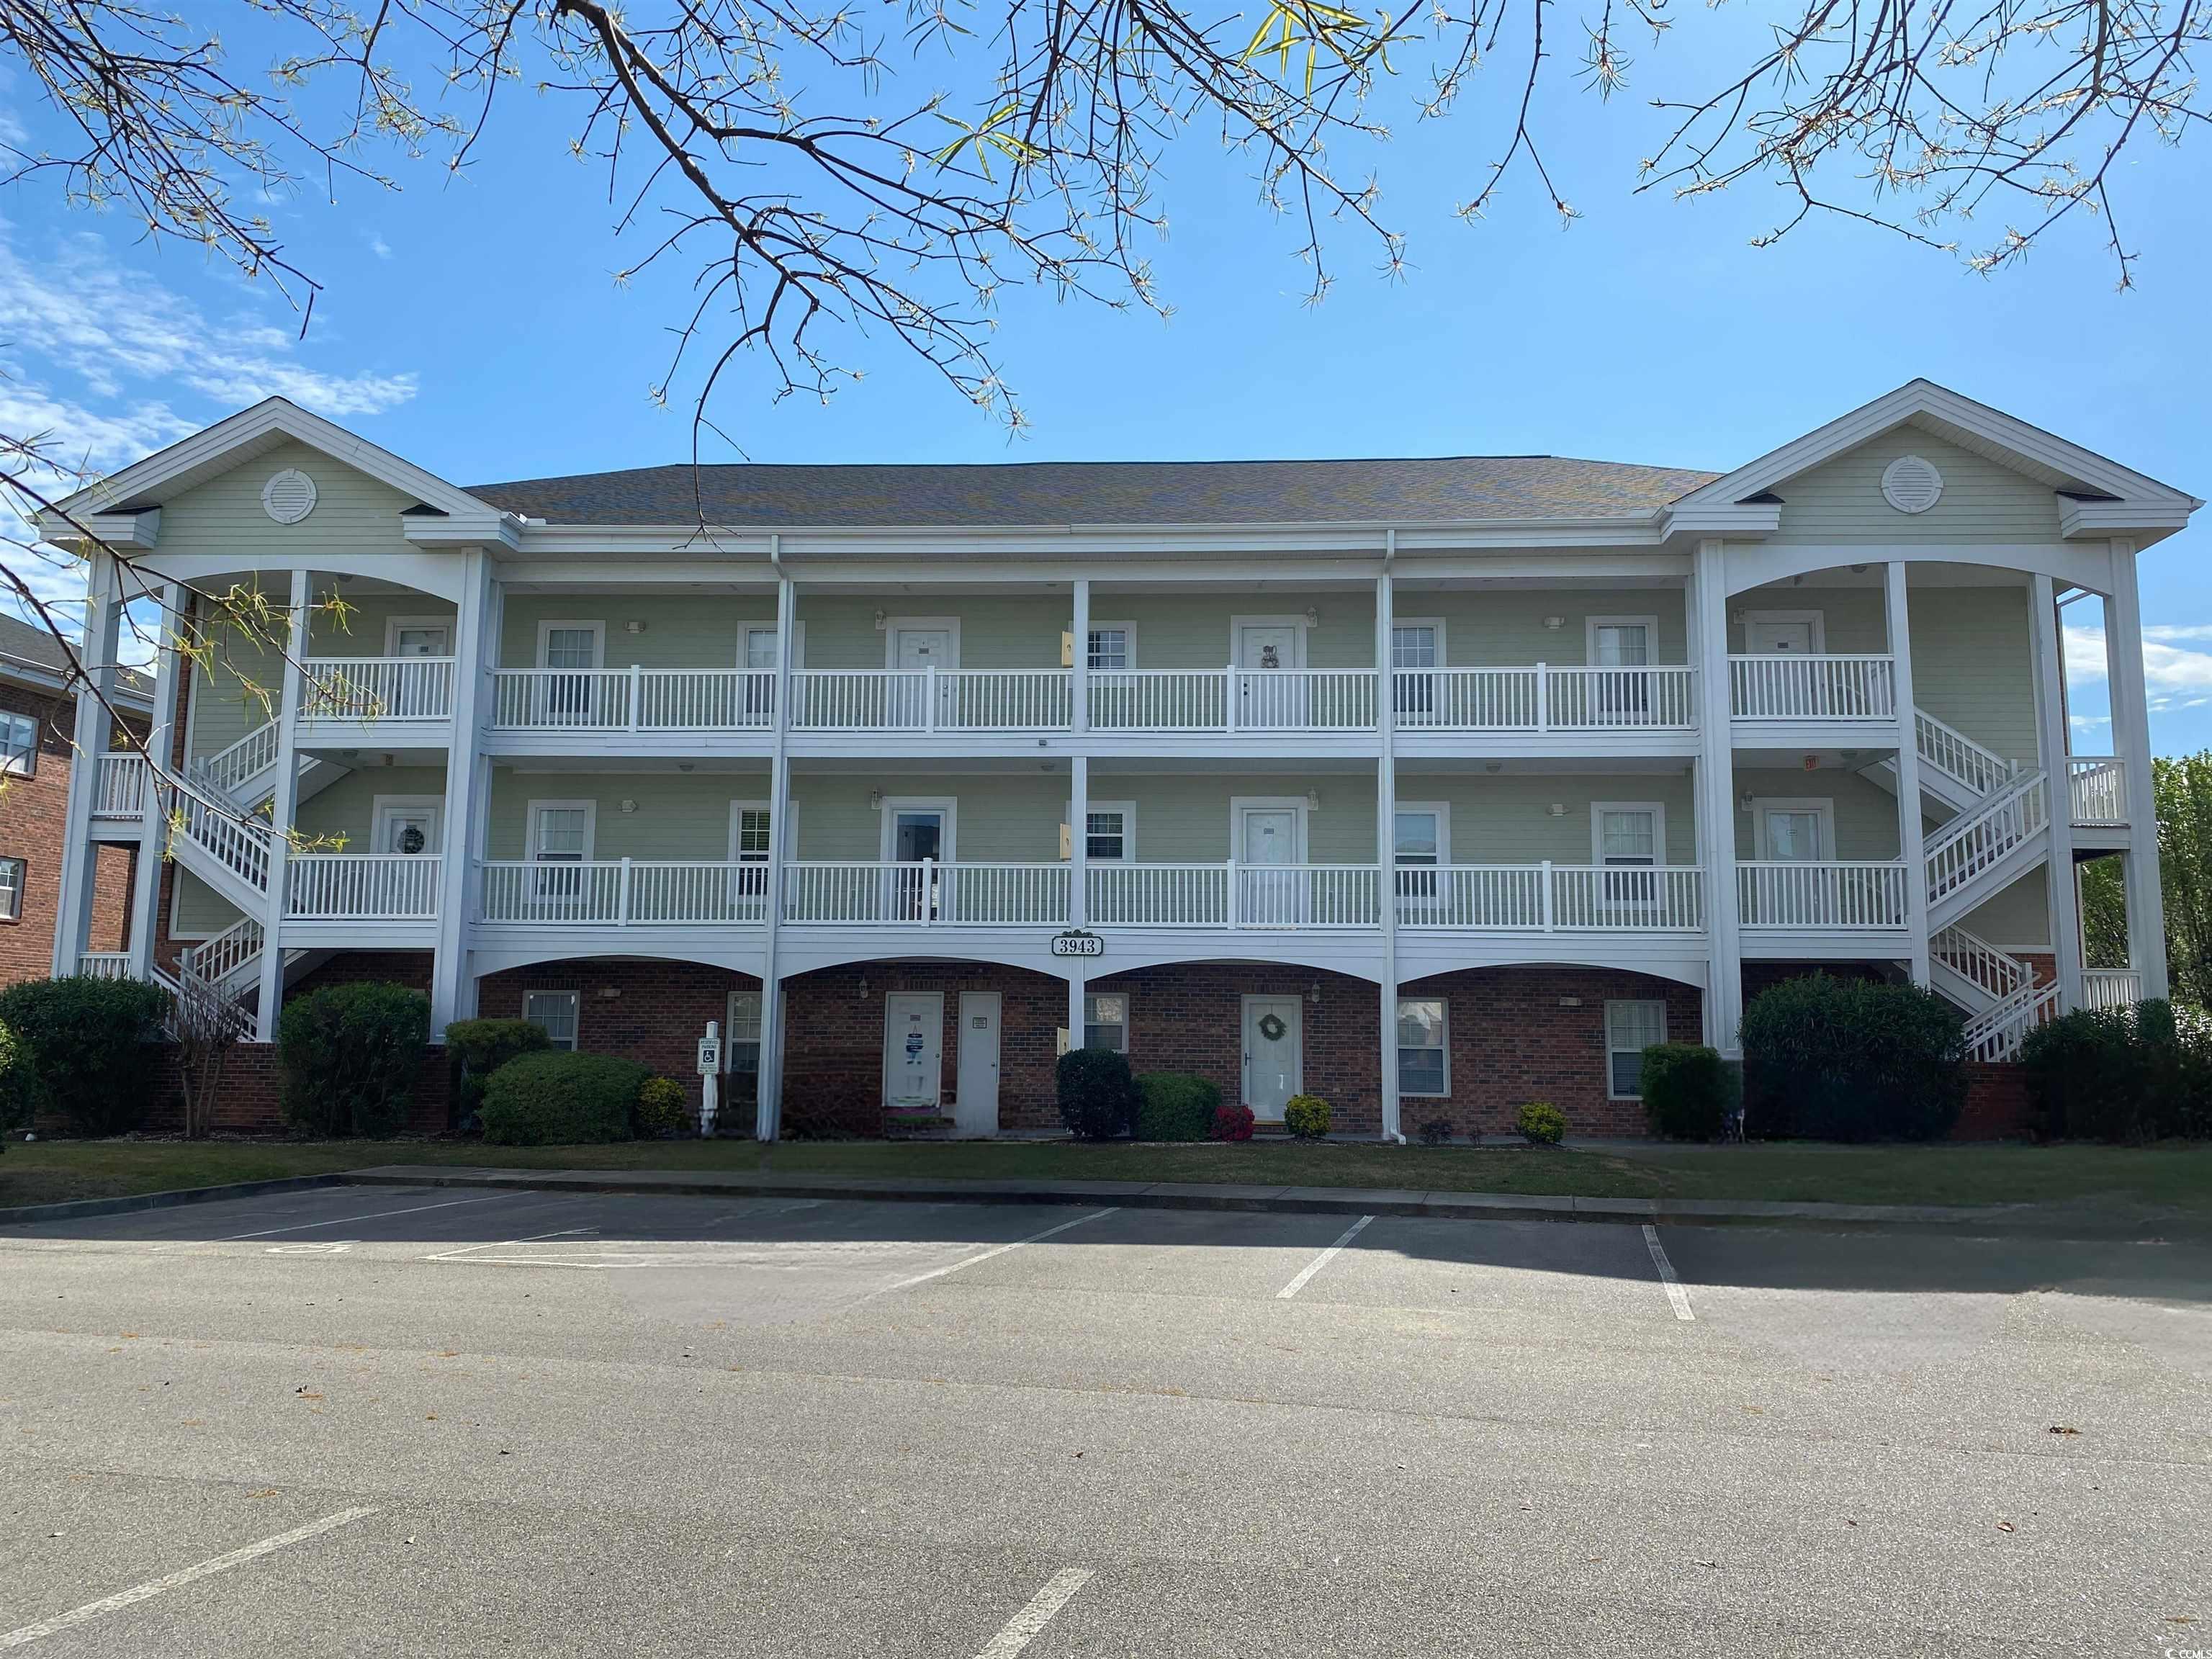 are you looking for a vacation/2nd home or just a nice area to live as your primary residence?  this 2/2 2nd floor condo is perfect for you!!  quiet park like setting, with pond views and mature trees, clean grounds and no junk cars sitting around! well maintained building made of hardie plank and brick, no vinyl siding here! the amenities include an outdoor pool, indoor pool and a well appointed gym on site.  best amenity is that you are only 4-6 minutes from the beach and about the same to our mb airport.  convenient location for groceries, restaurants, entertainment, hospitals, doctors offices and market common.  private storage unit on your back porch.  schedule your private or virtual showing today!